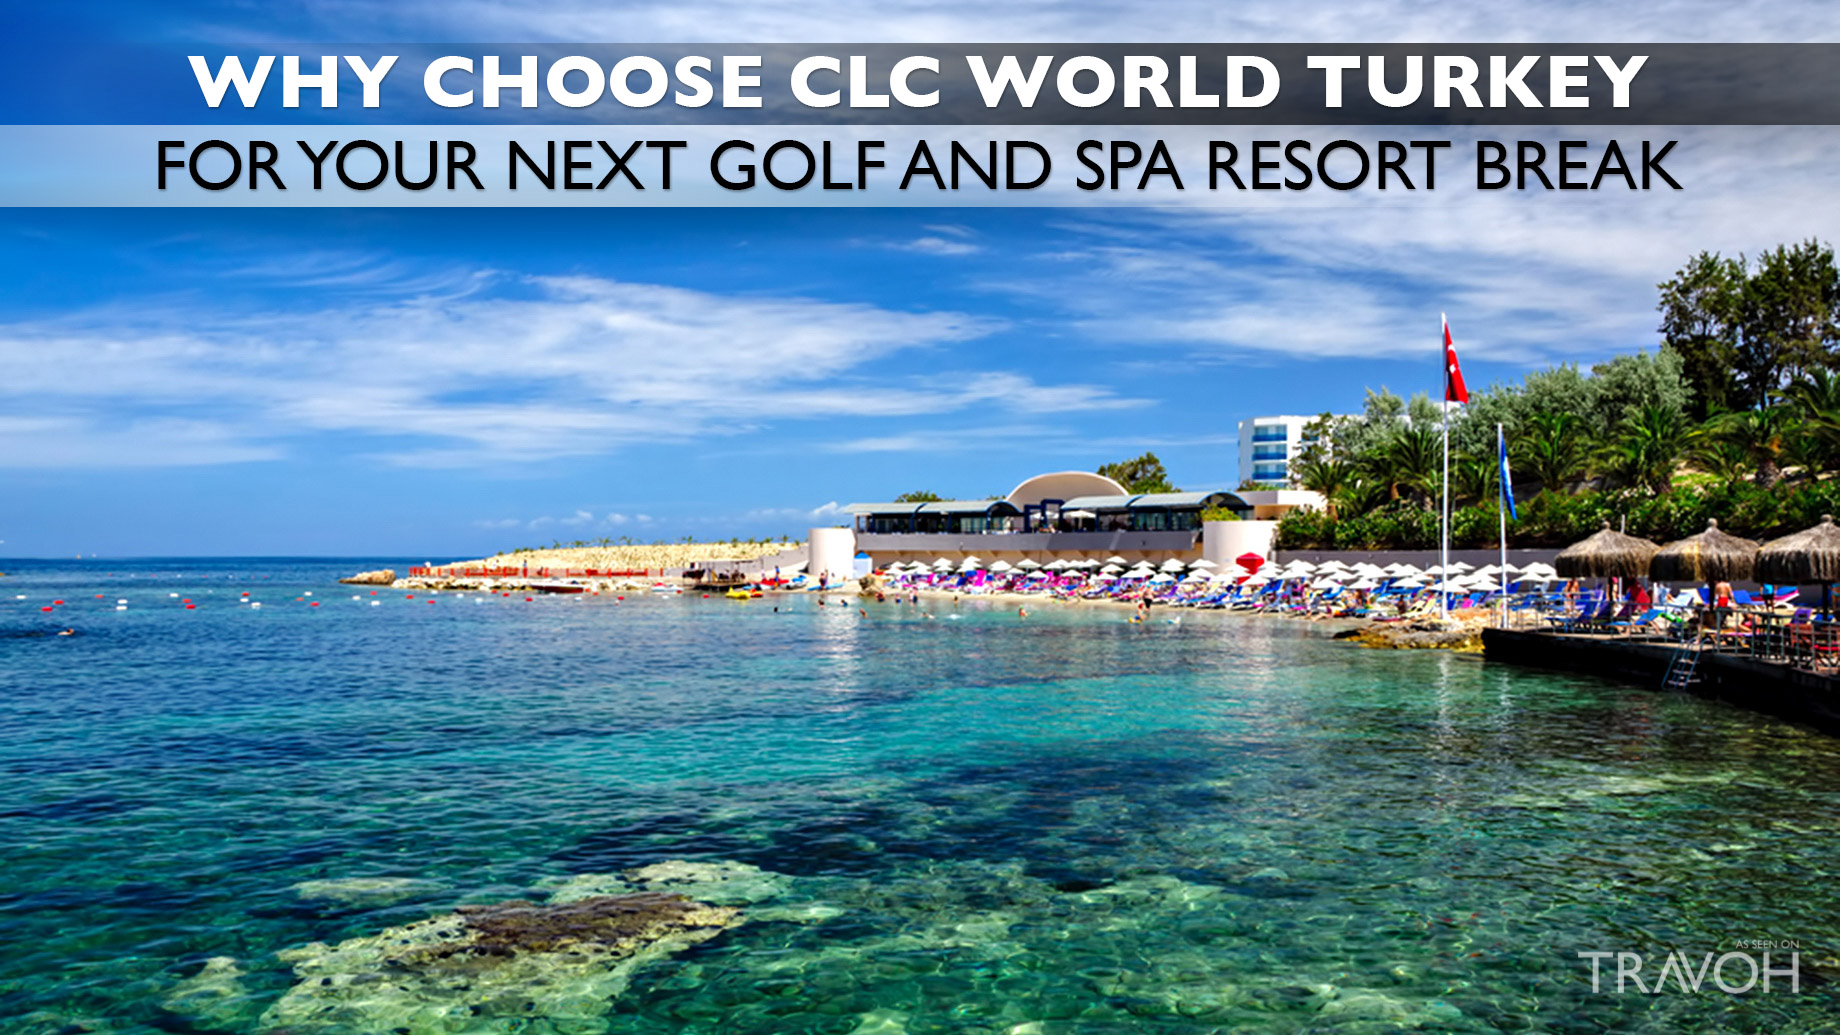 Why Choose CLC World Turkey for Your Next Golf and Spa Resort Break